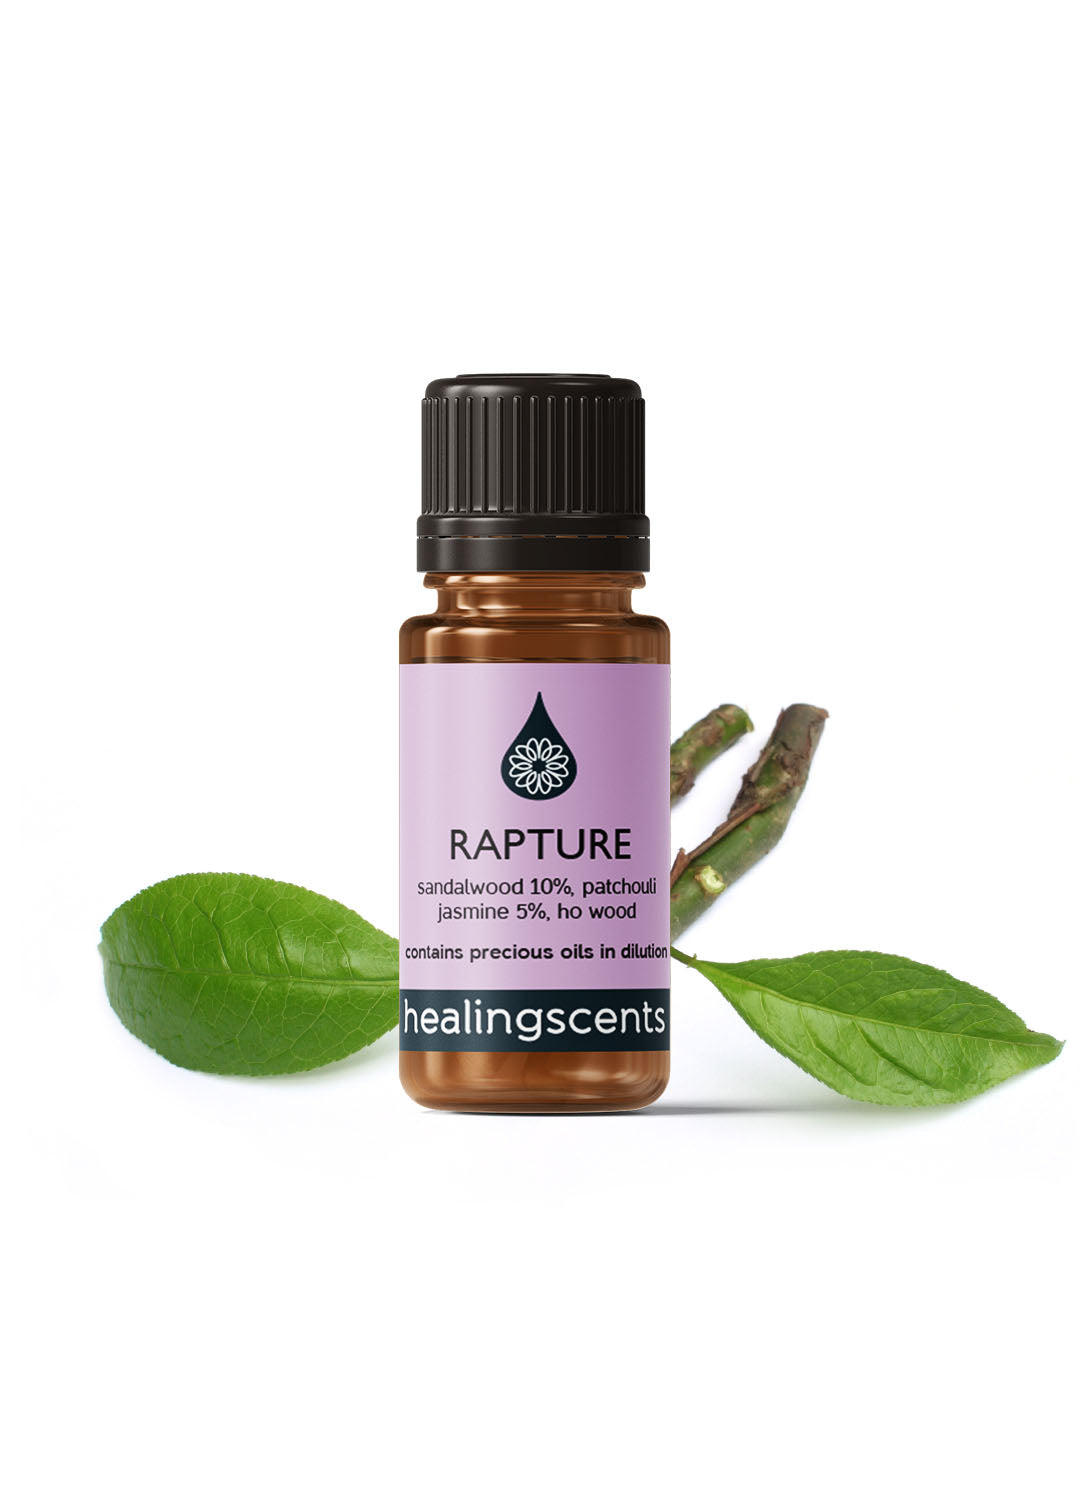 Rapture Synergy Blend Natural Perfumes Healingscents   